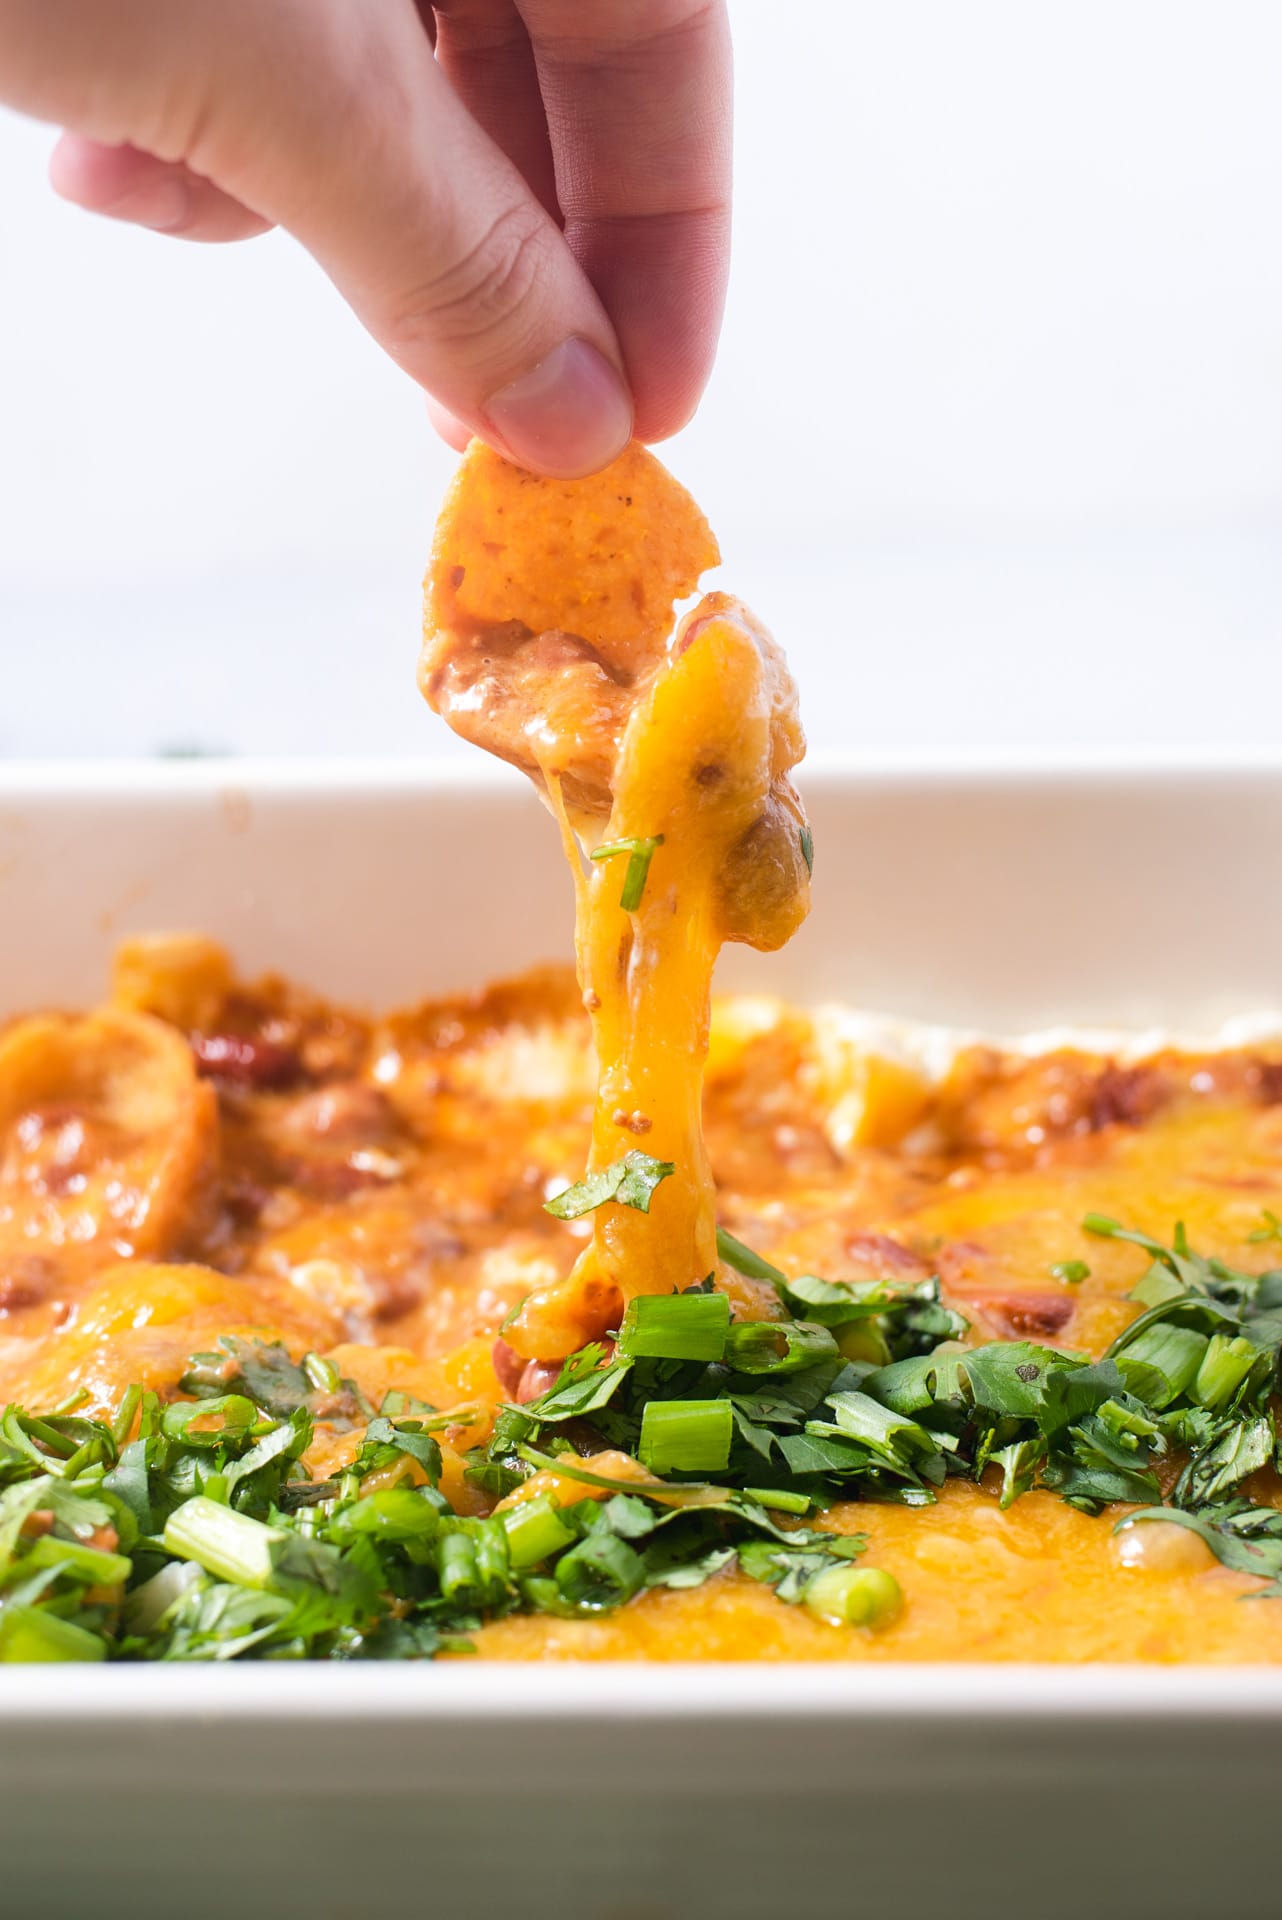 Frito pulling cheese from casserole dish